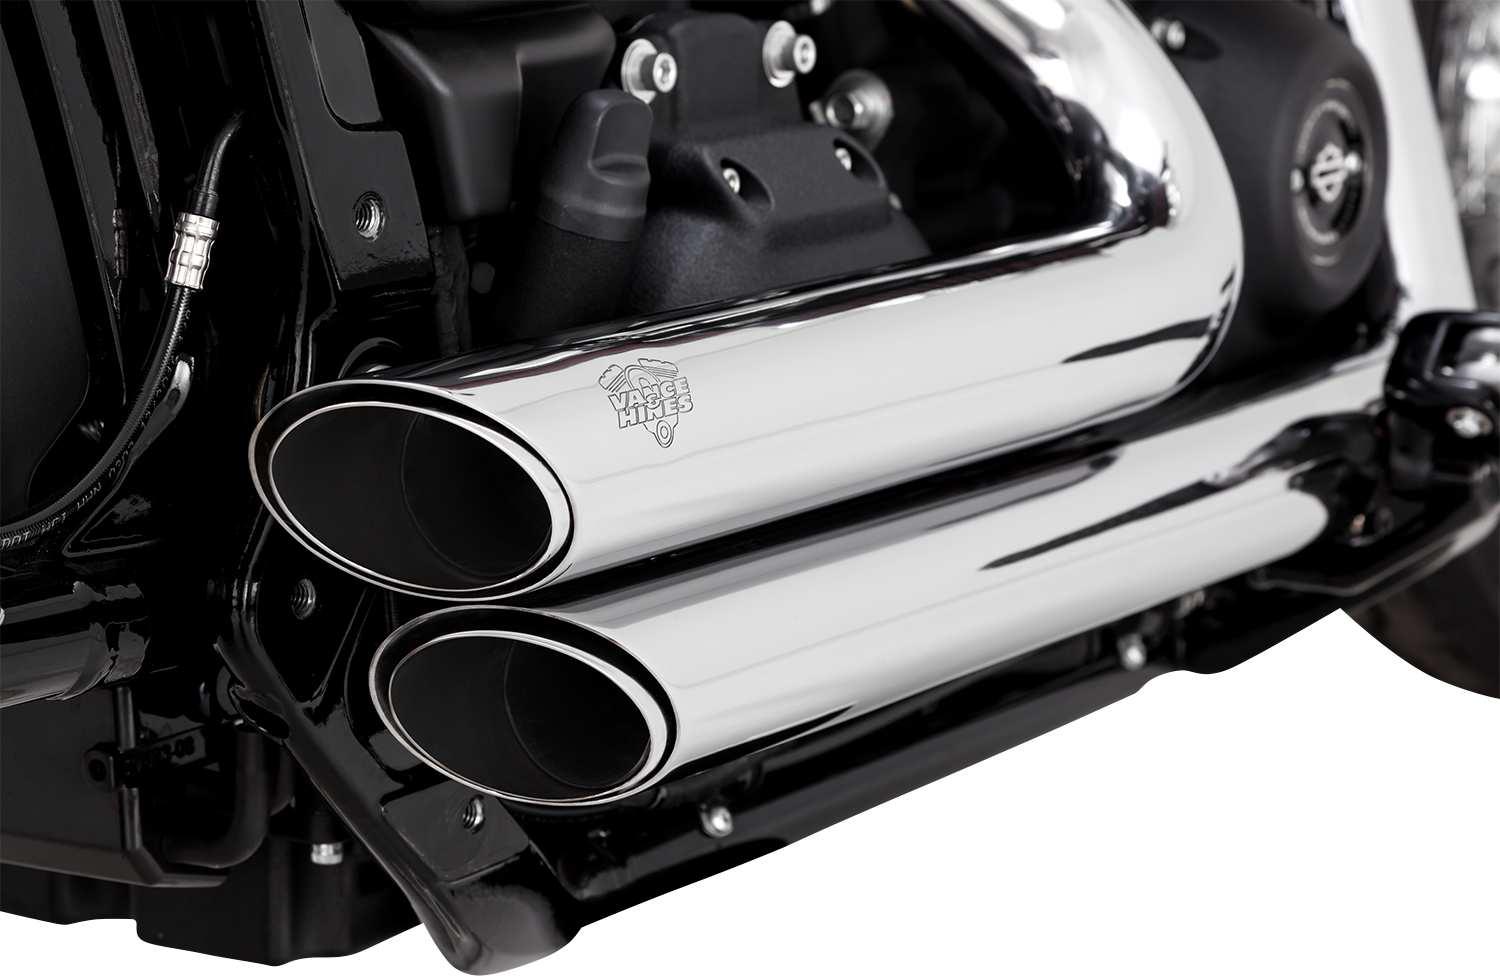 VANCE & HINES Shortshots Staggered Exhaust System - Chrome 17333